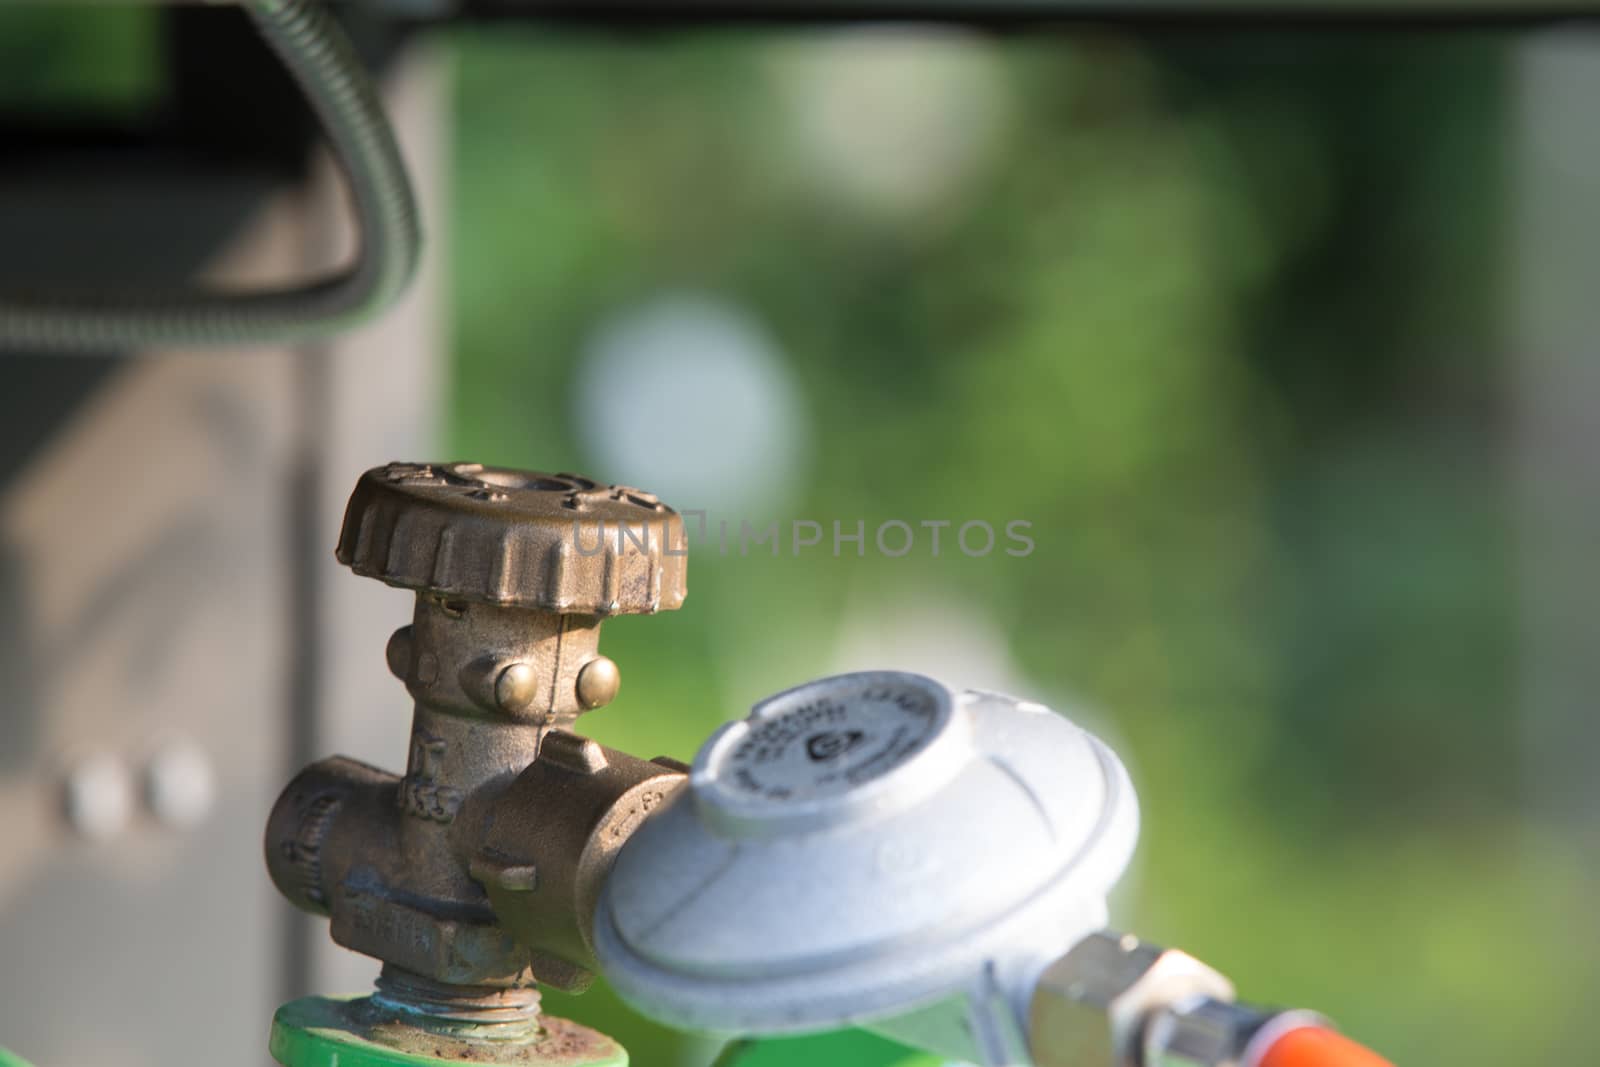 Barbeceue gas bottle closeup by abeckman2706